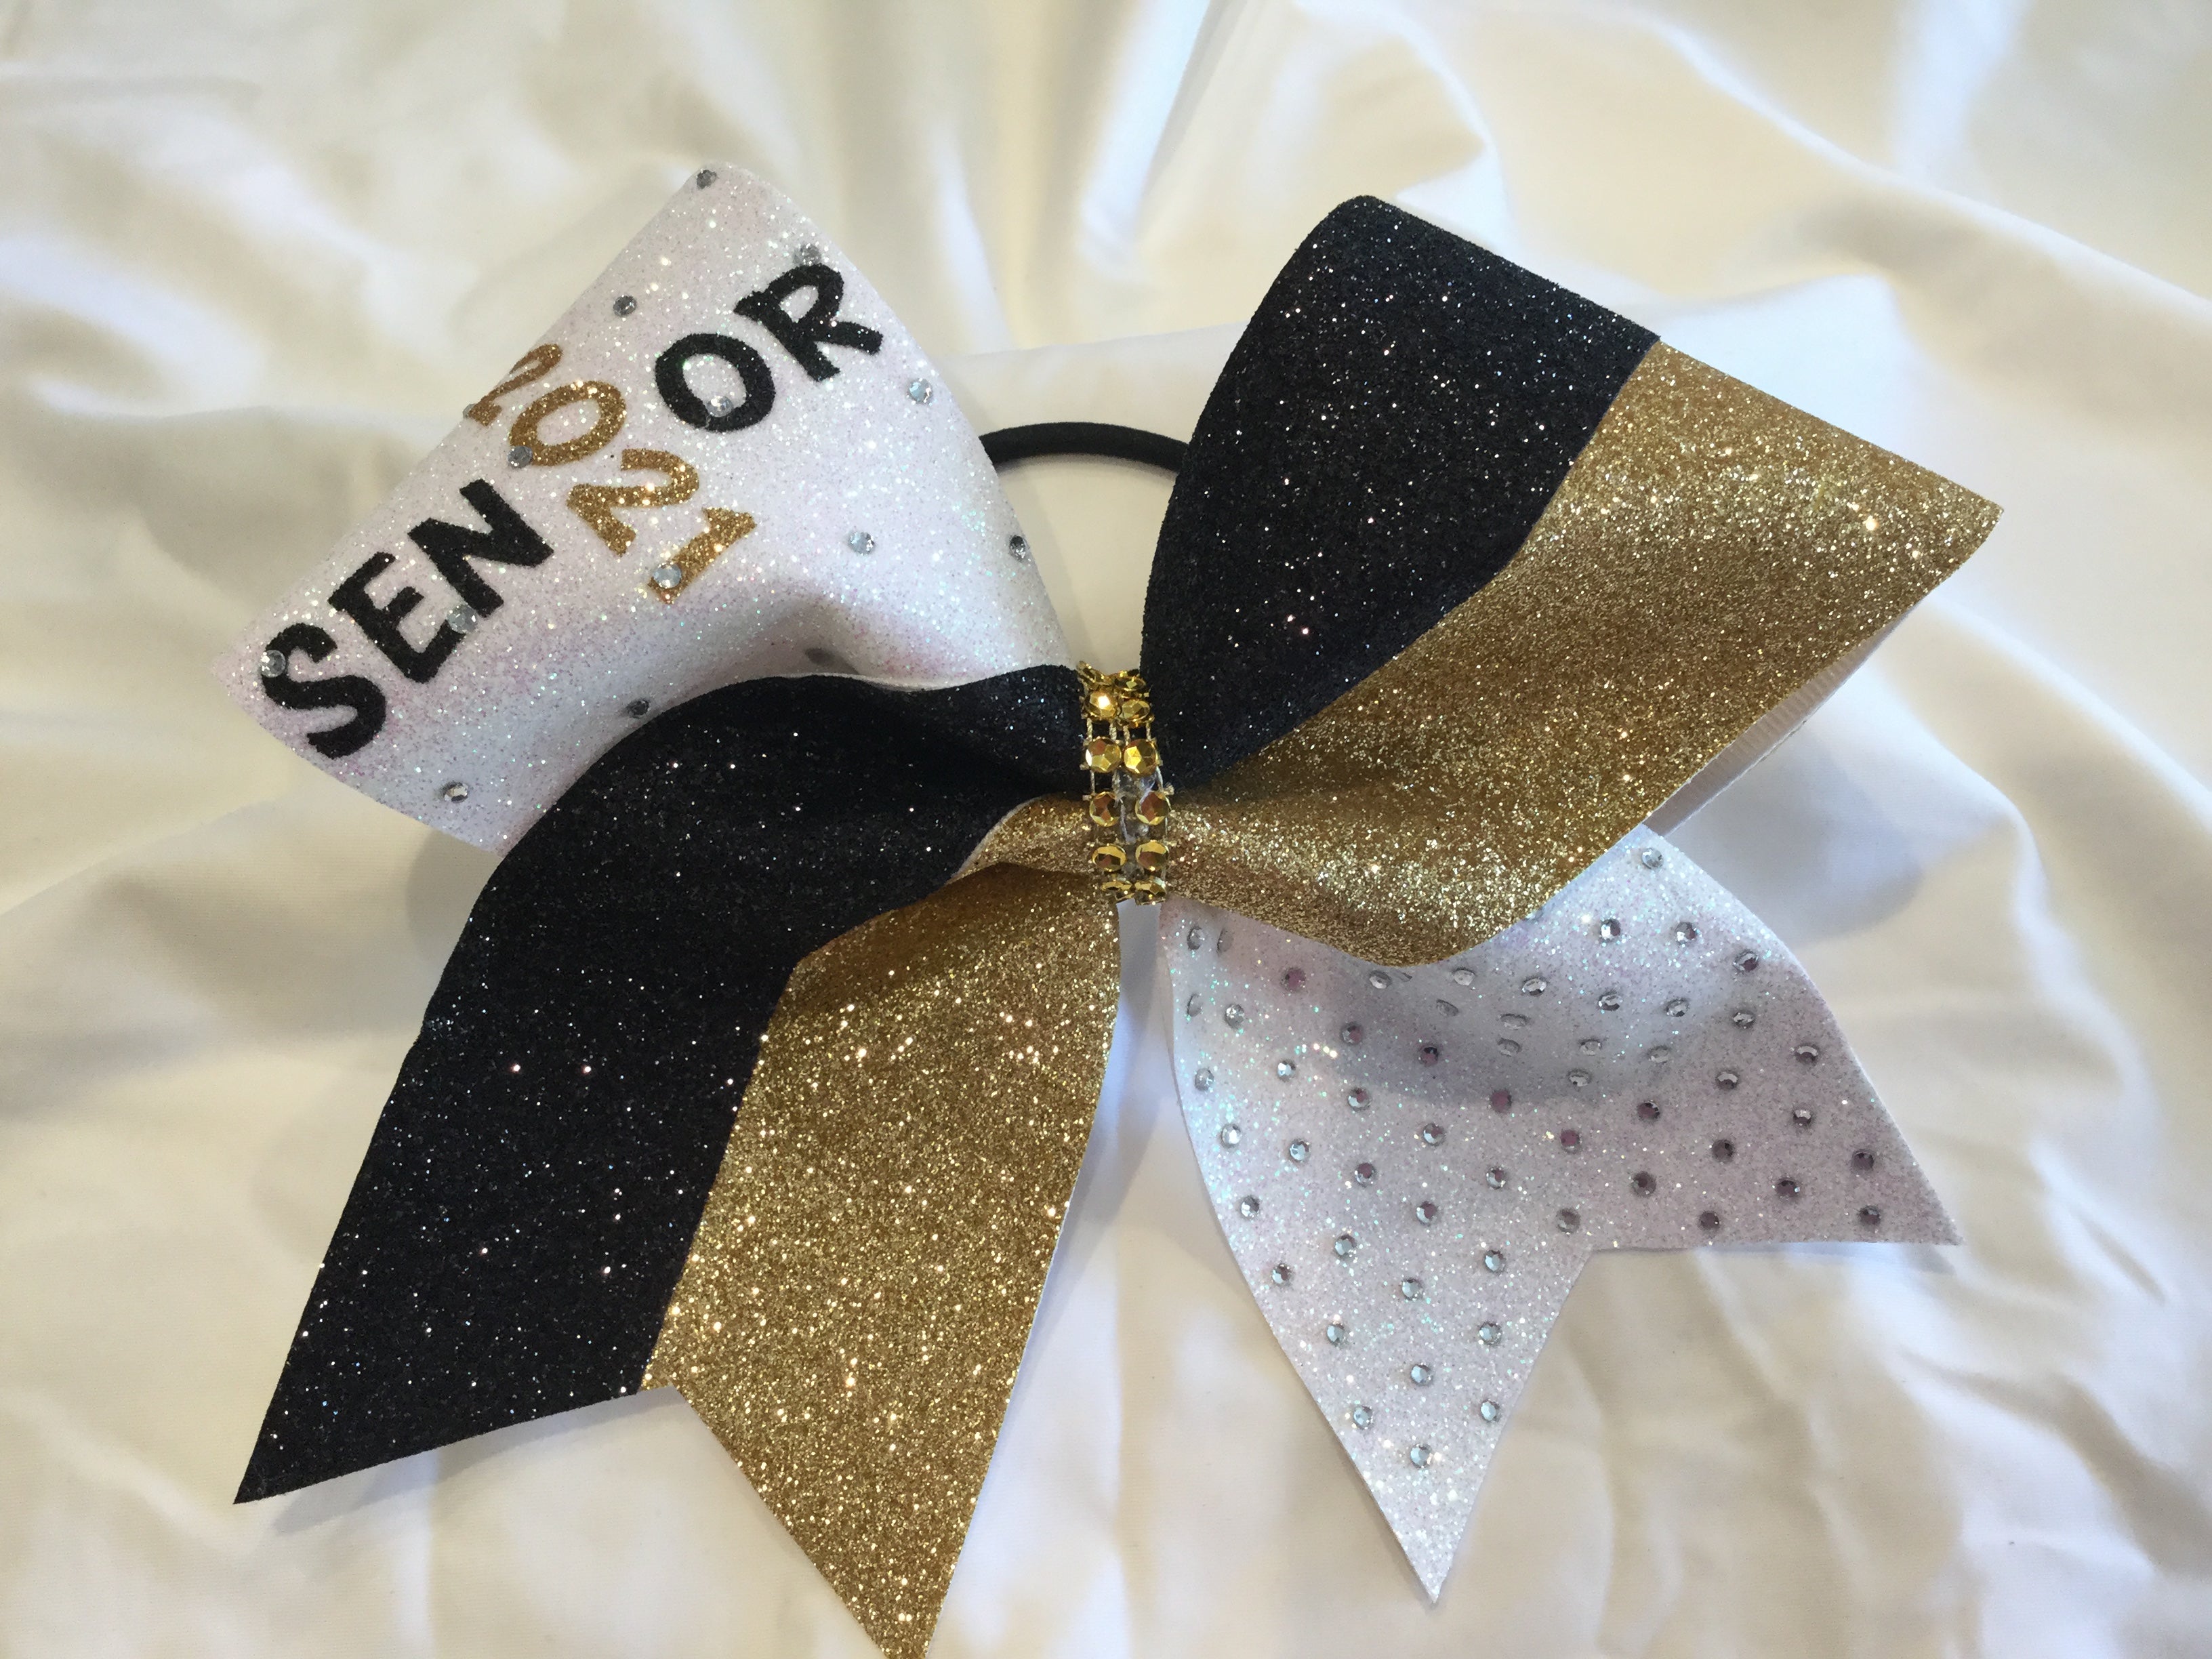 Hunter Cheer Bow in Black and Gold